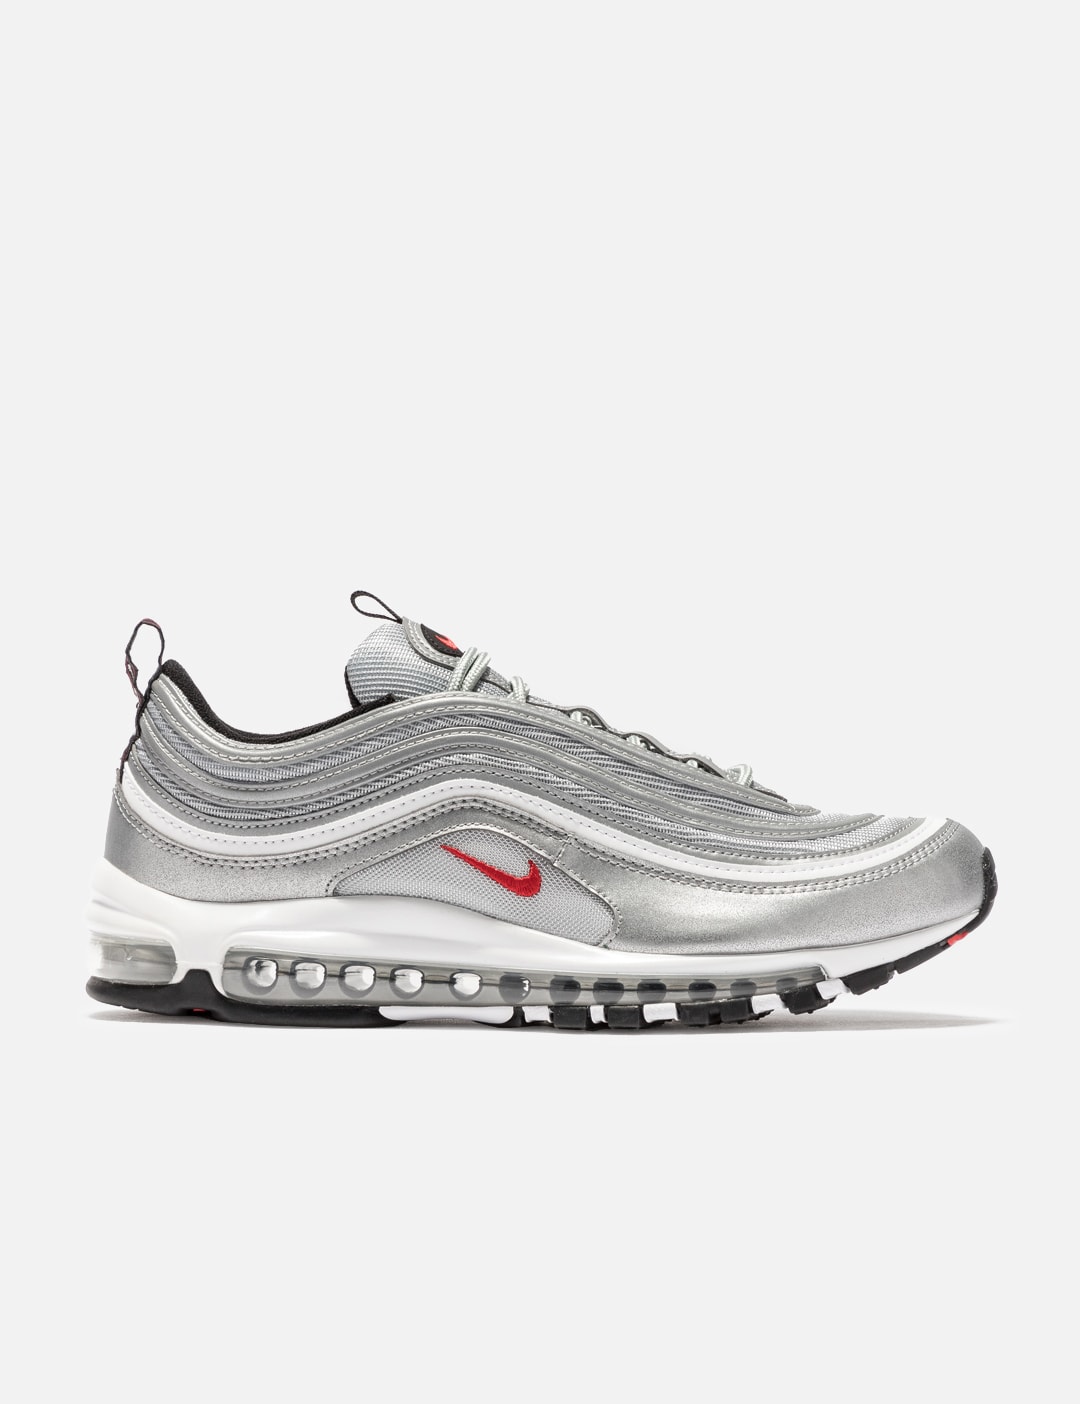 Nike - Air Max 97 Silver Bullet | HBX - Globally Curated and Lifestyle by Hypebeast